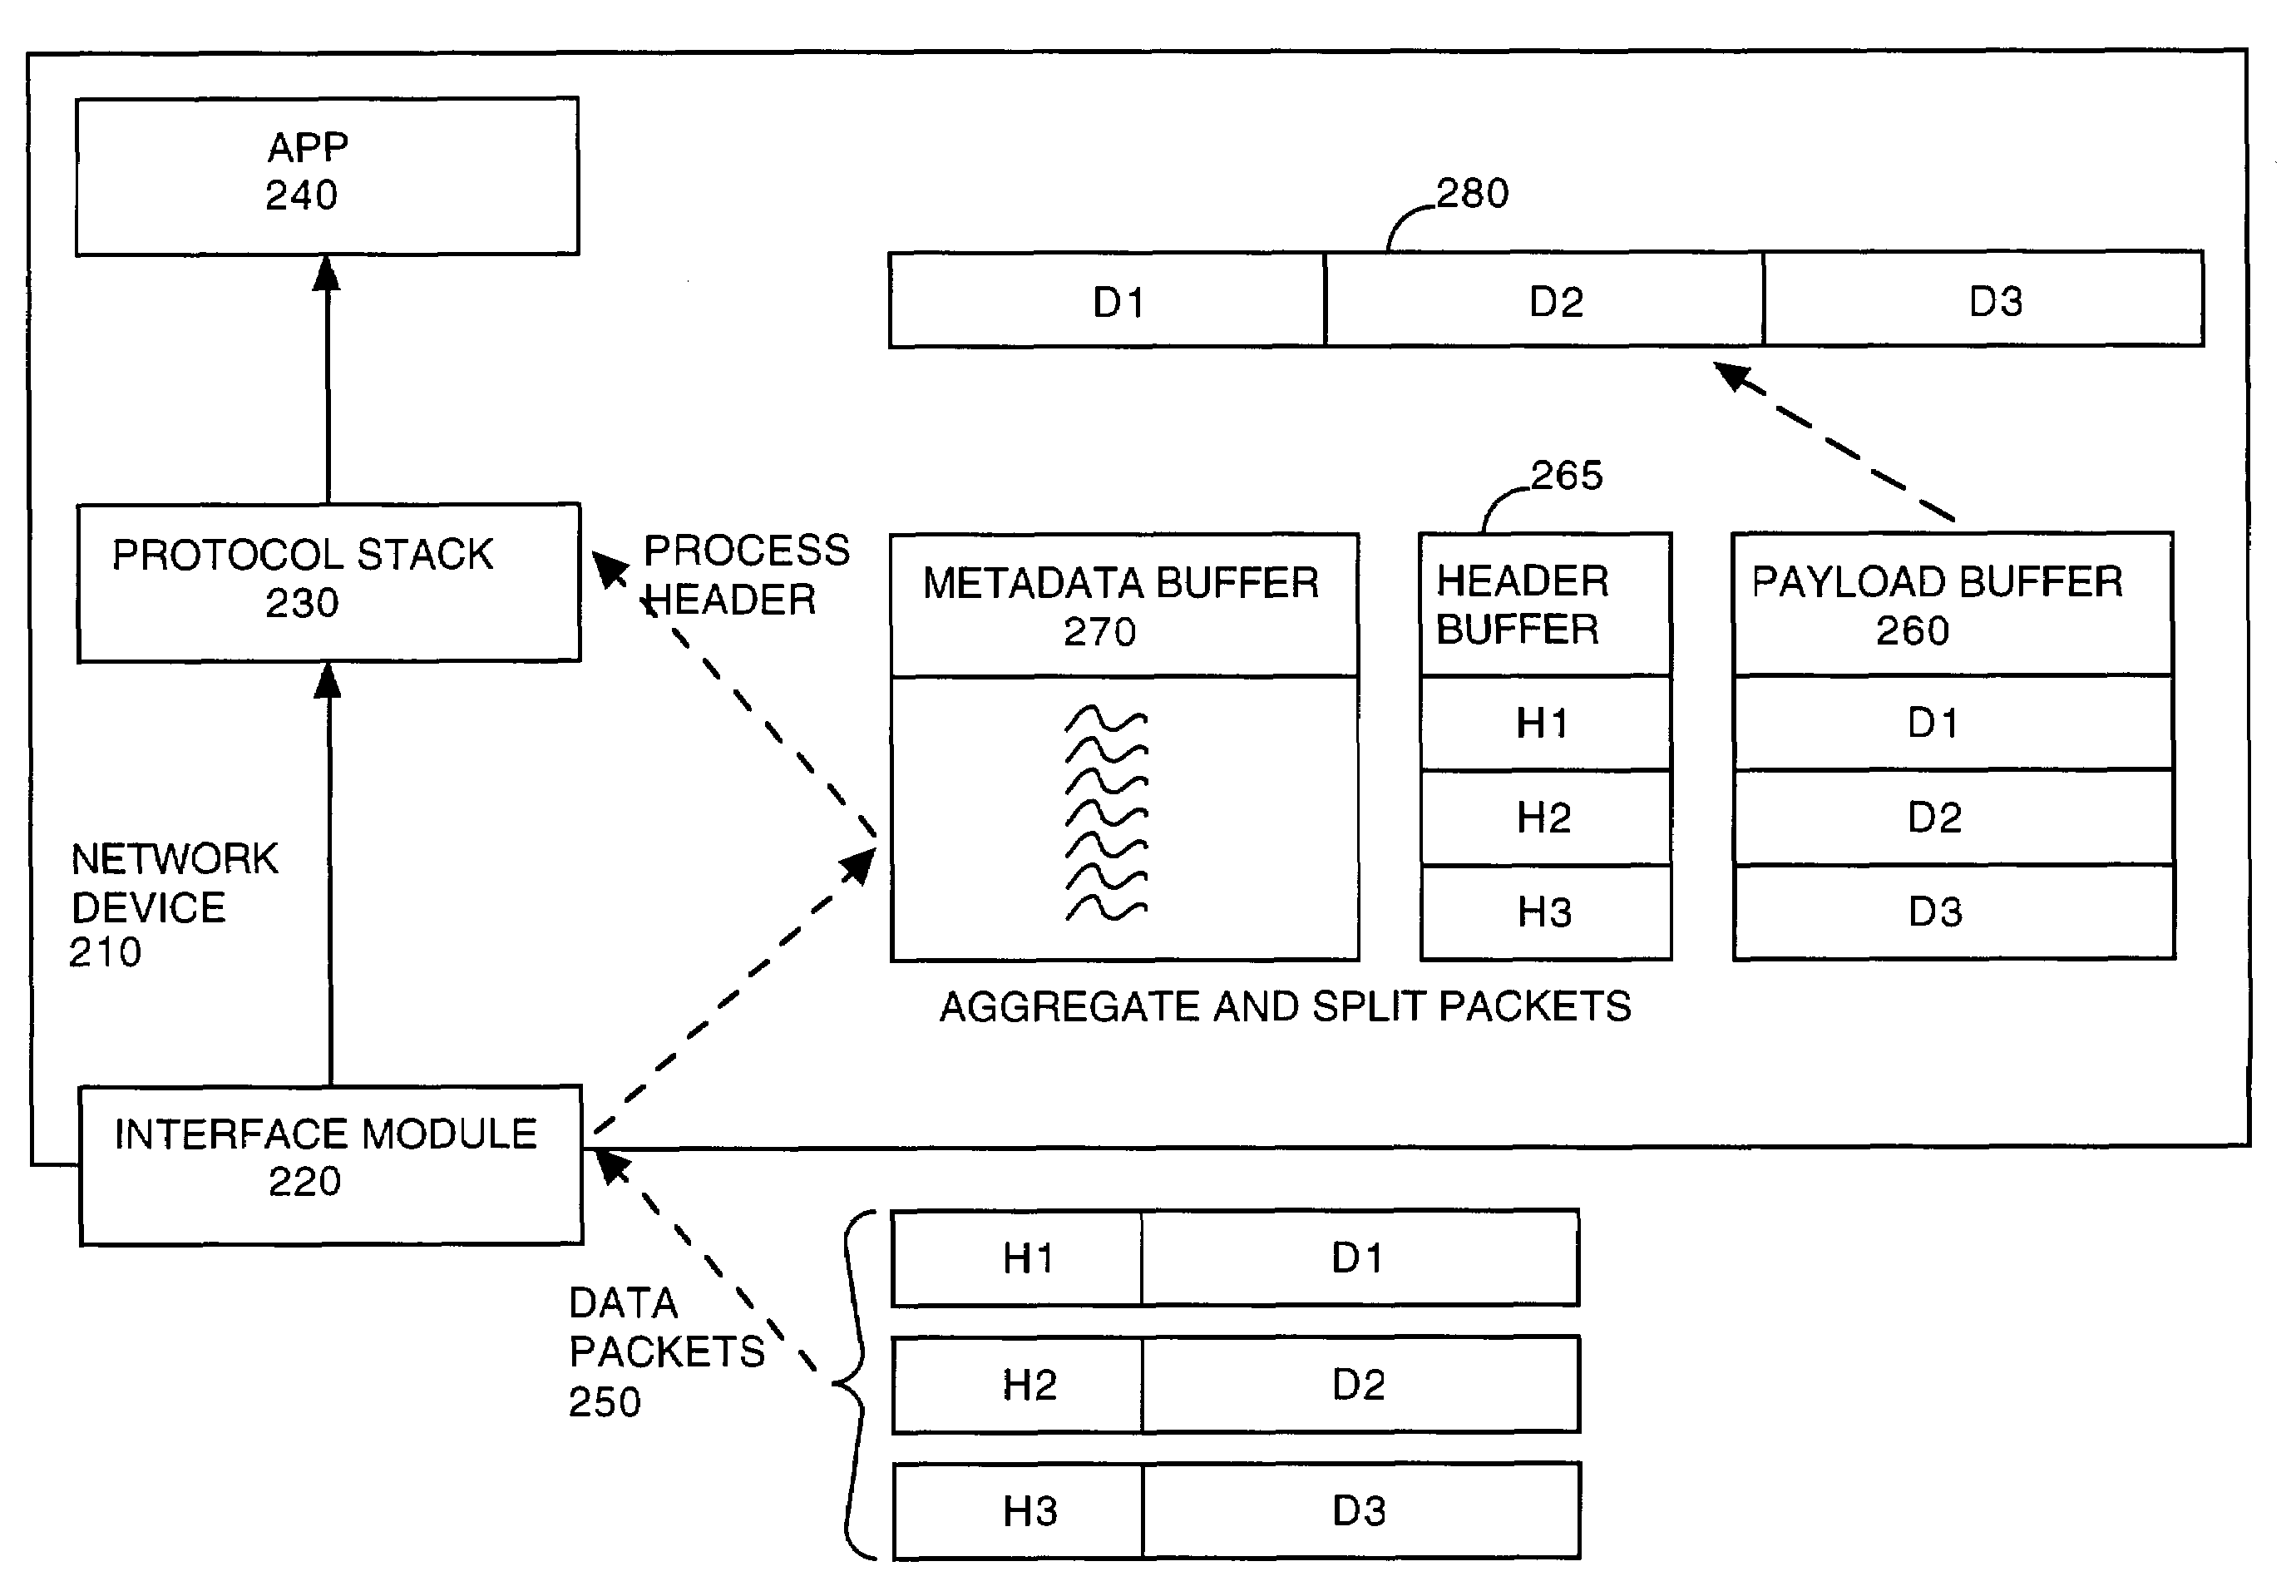 Load-balancing utilizing one or more threads of execution for implementing a protocol stack